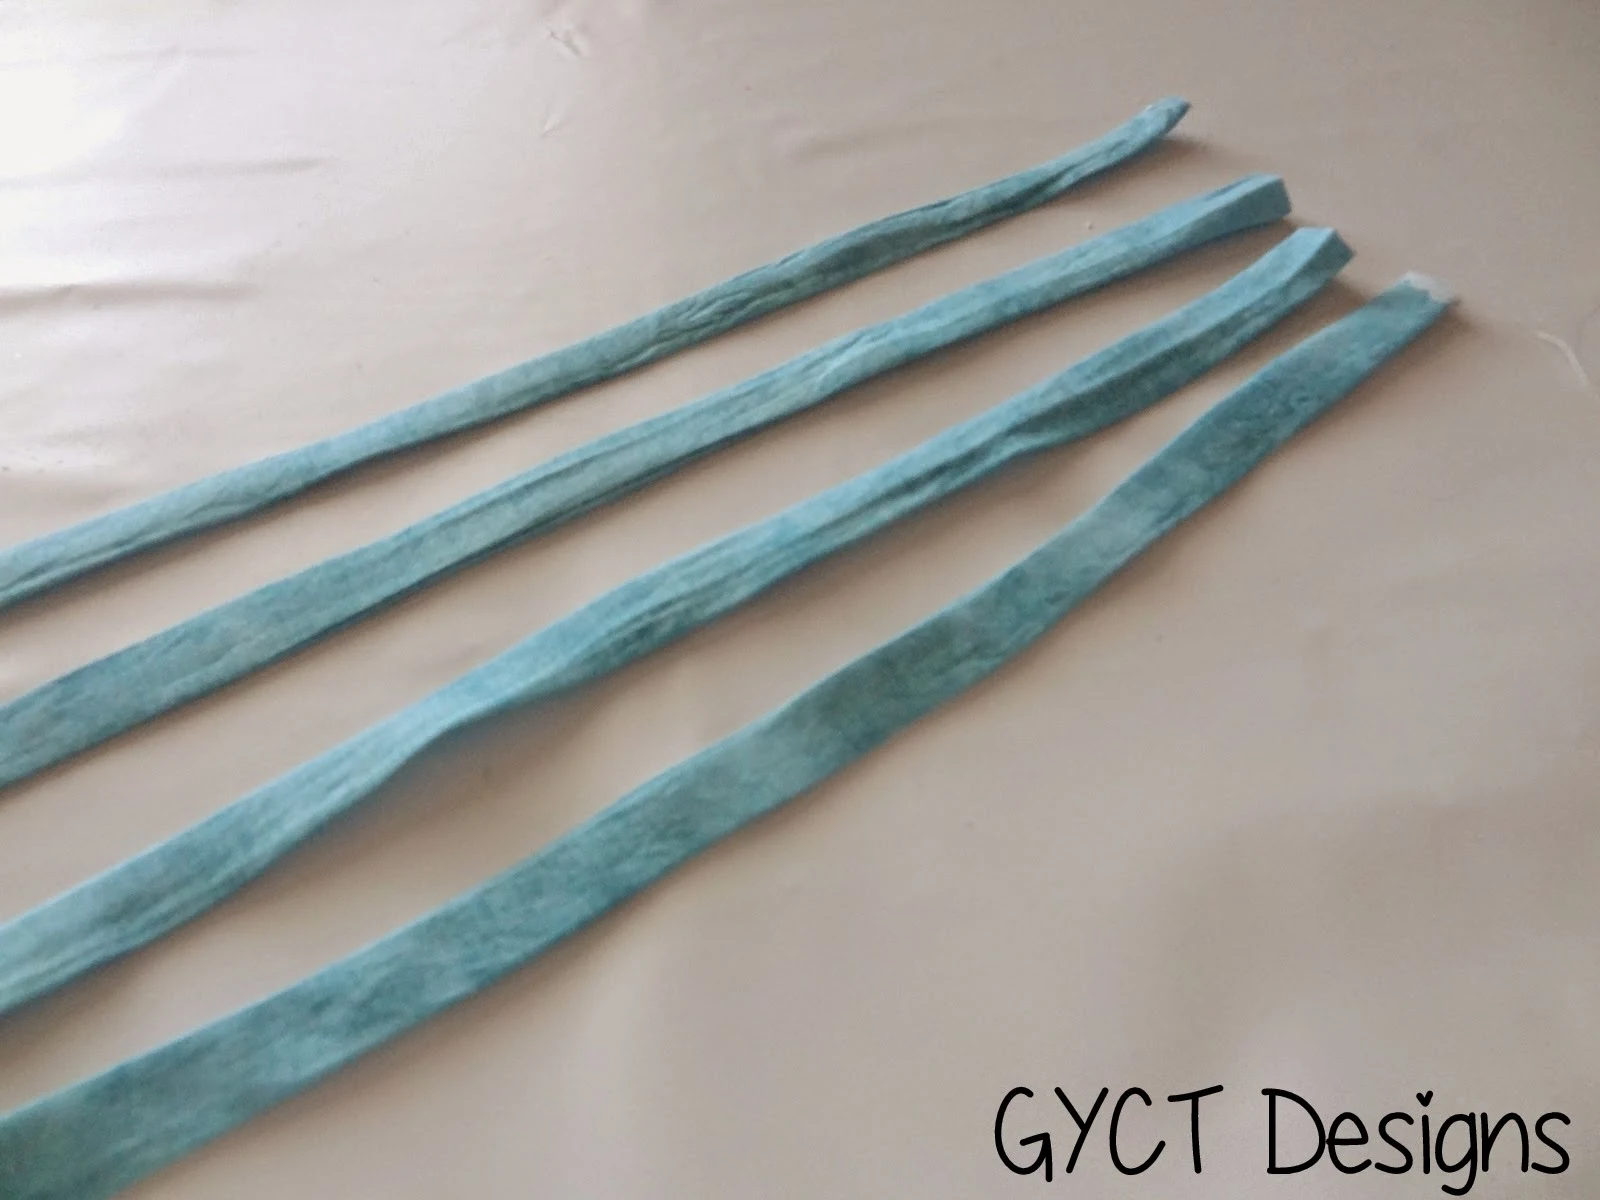 Sewing Traditional Straps to a Lined Dress by GYCT